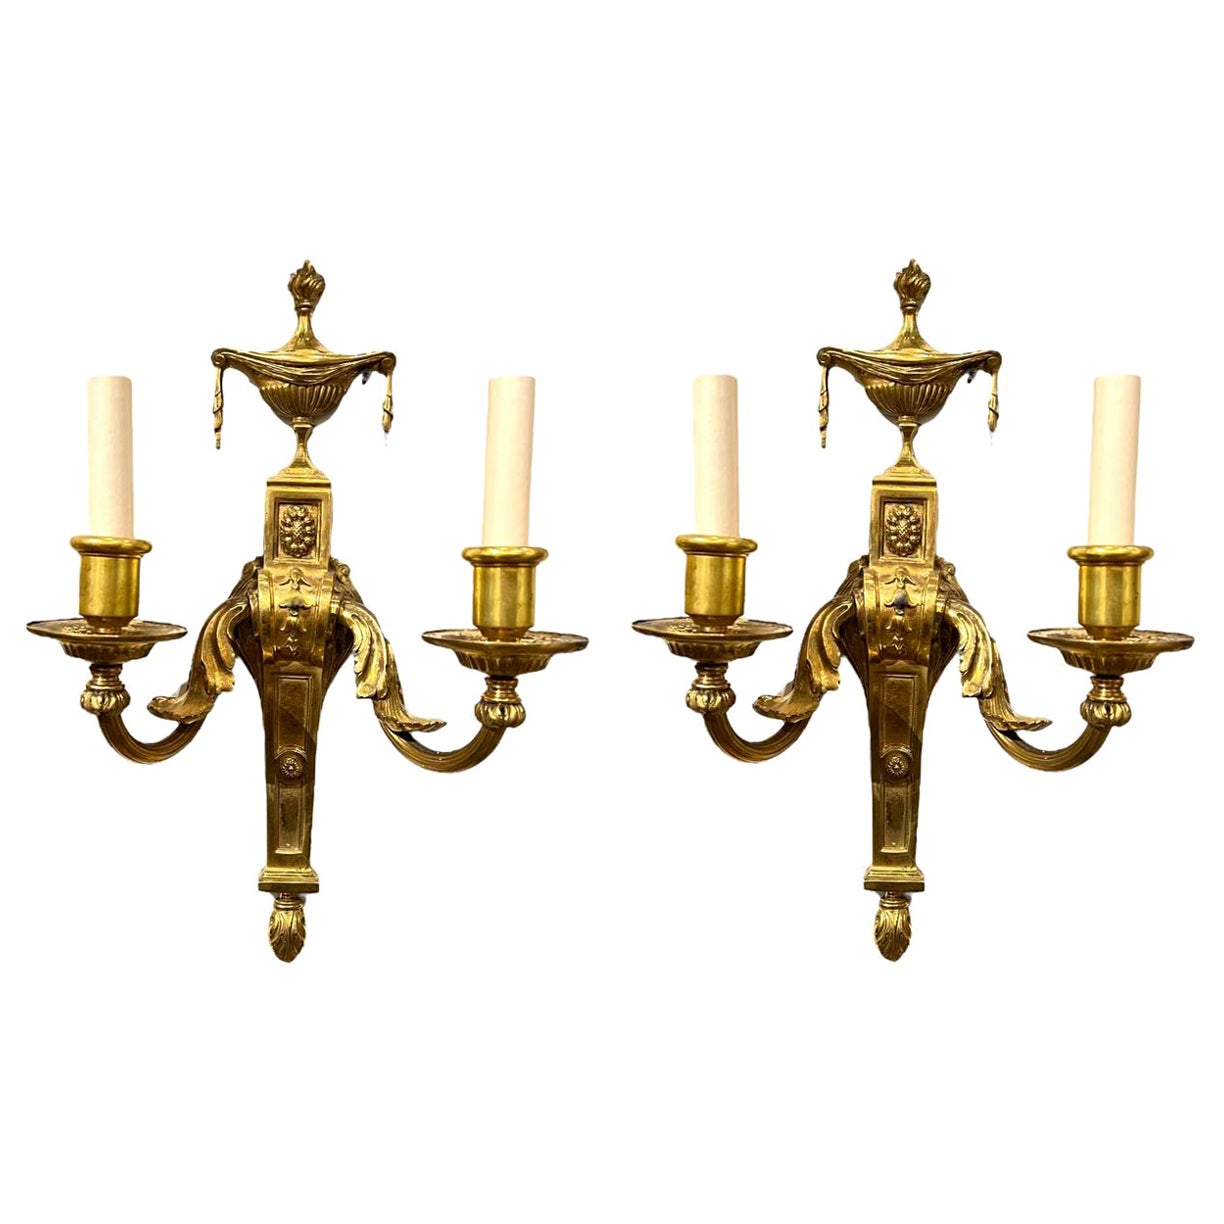 1920's Caldwell Neoclassic Sconces